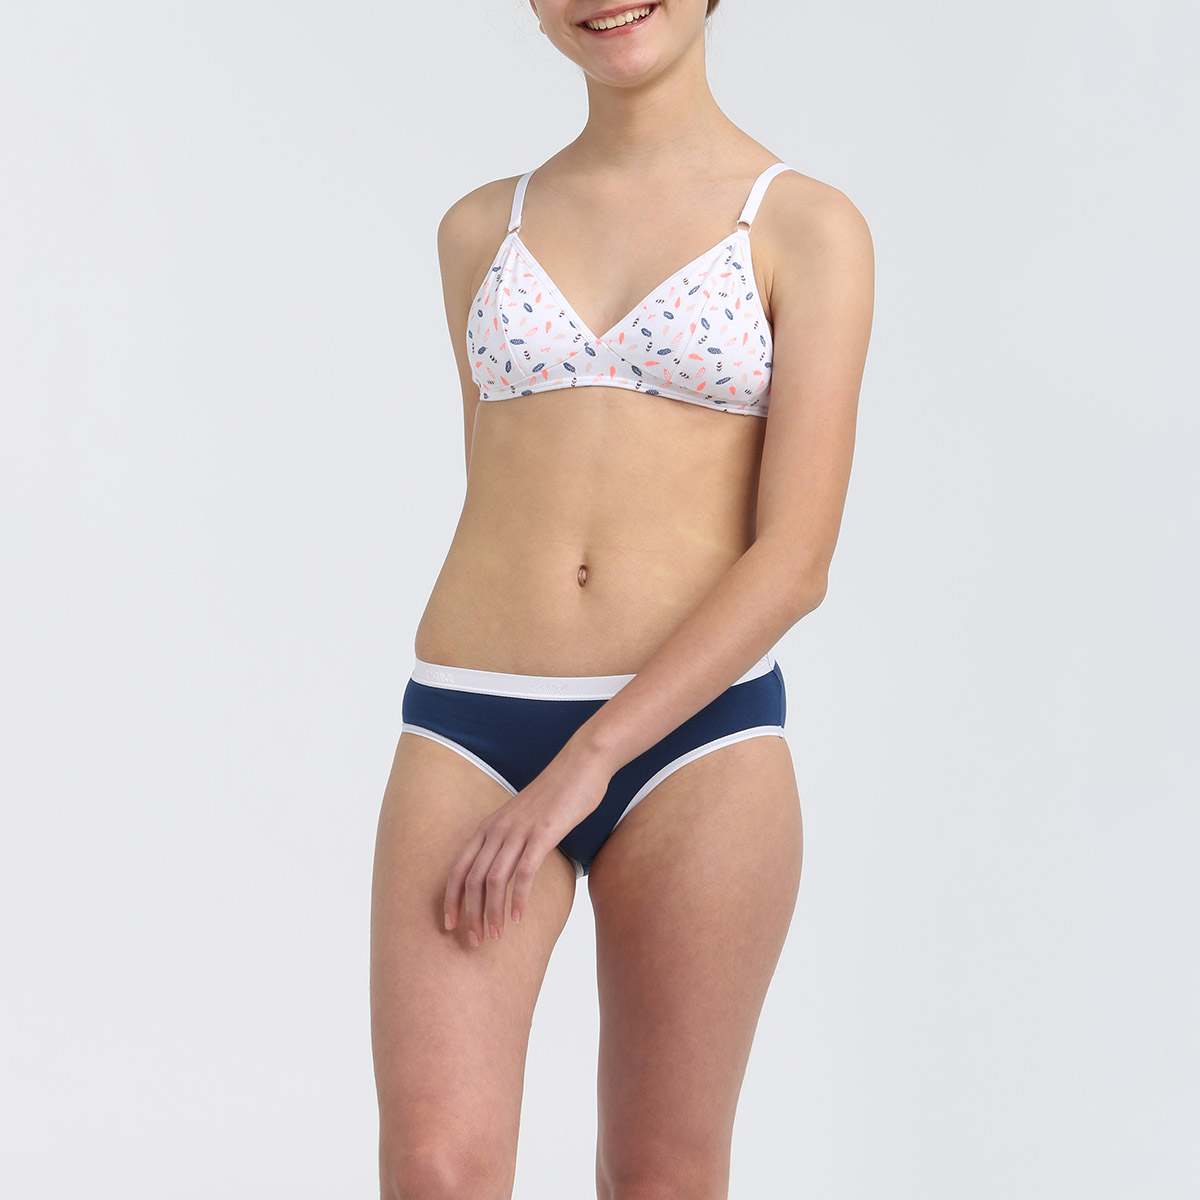 Les Pockets girls' white feather print bra with removable padding